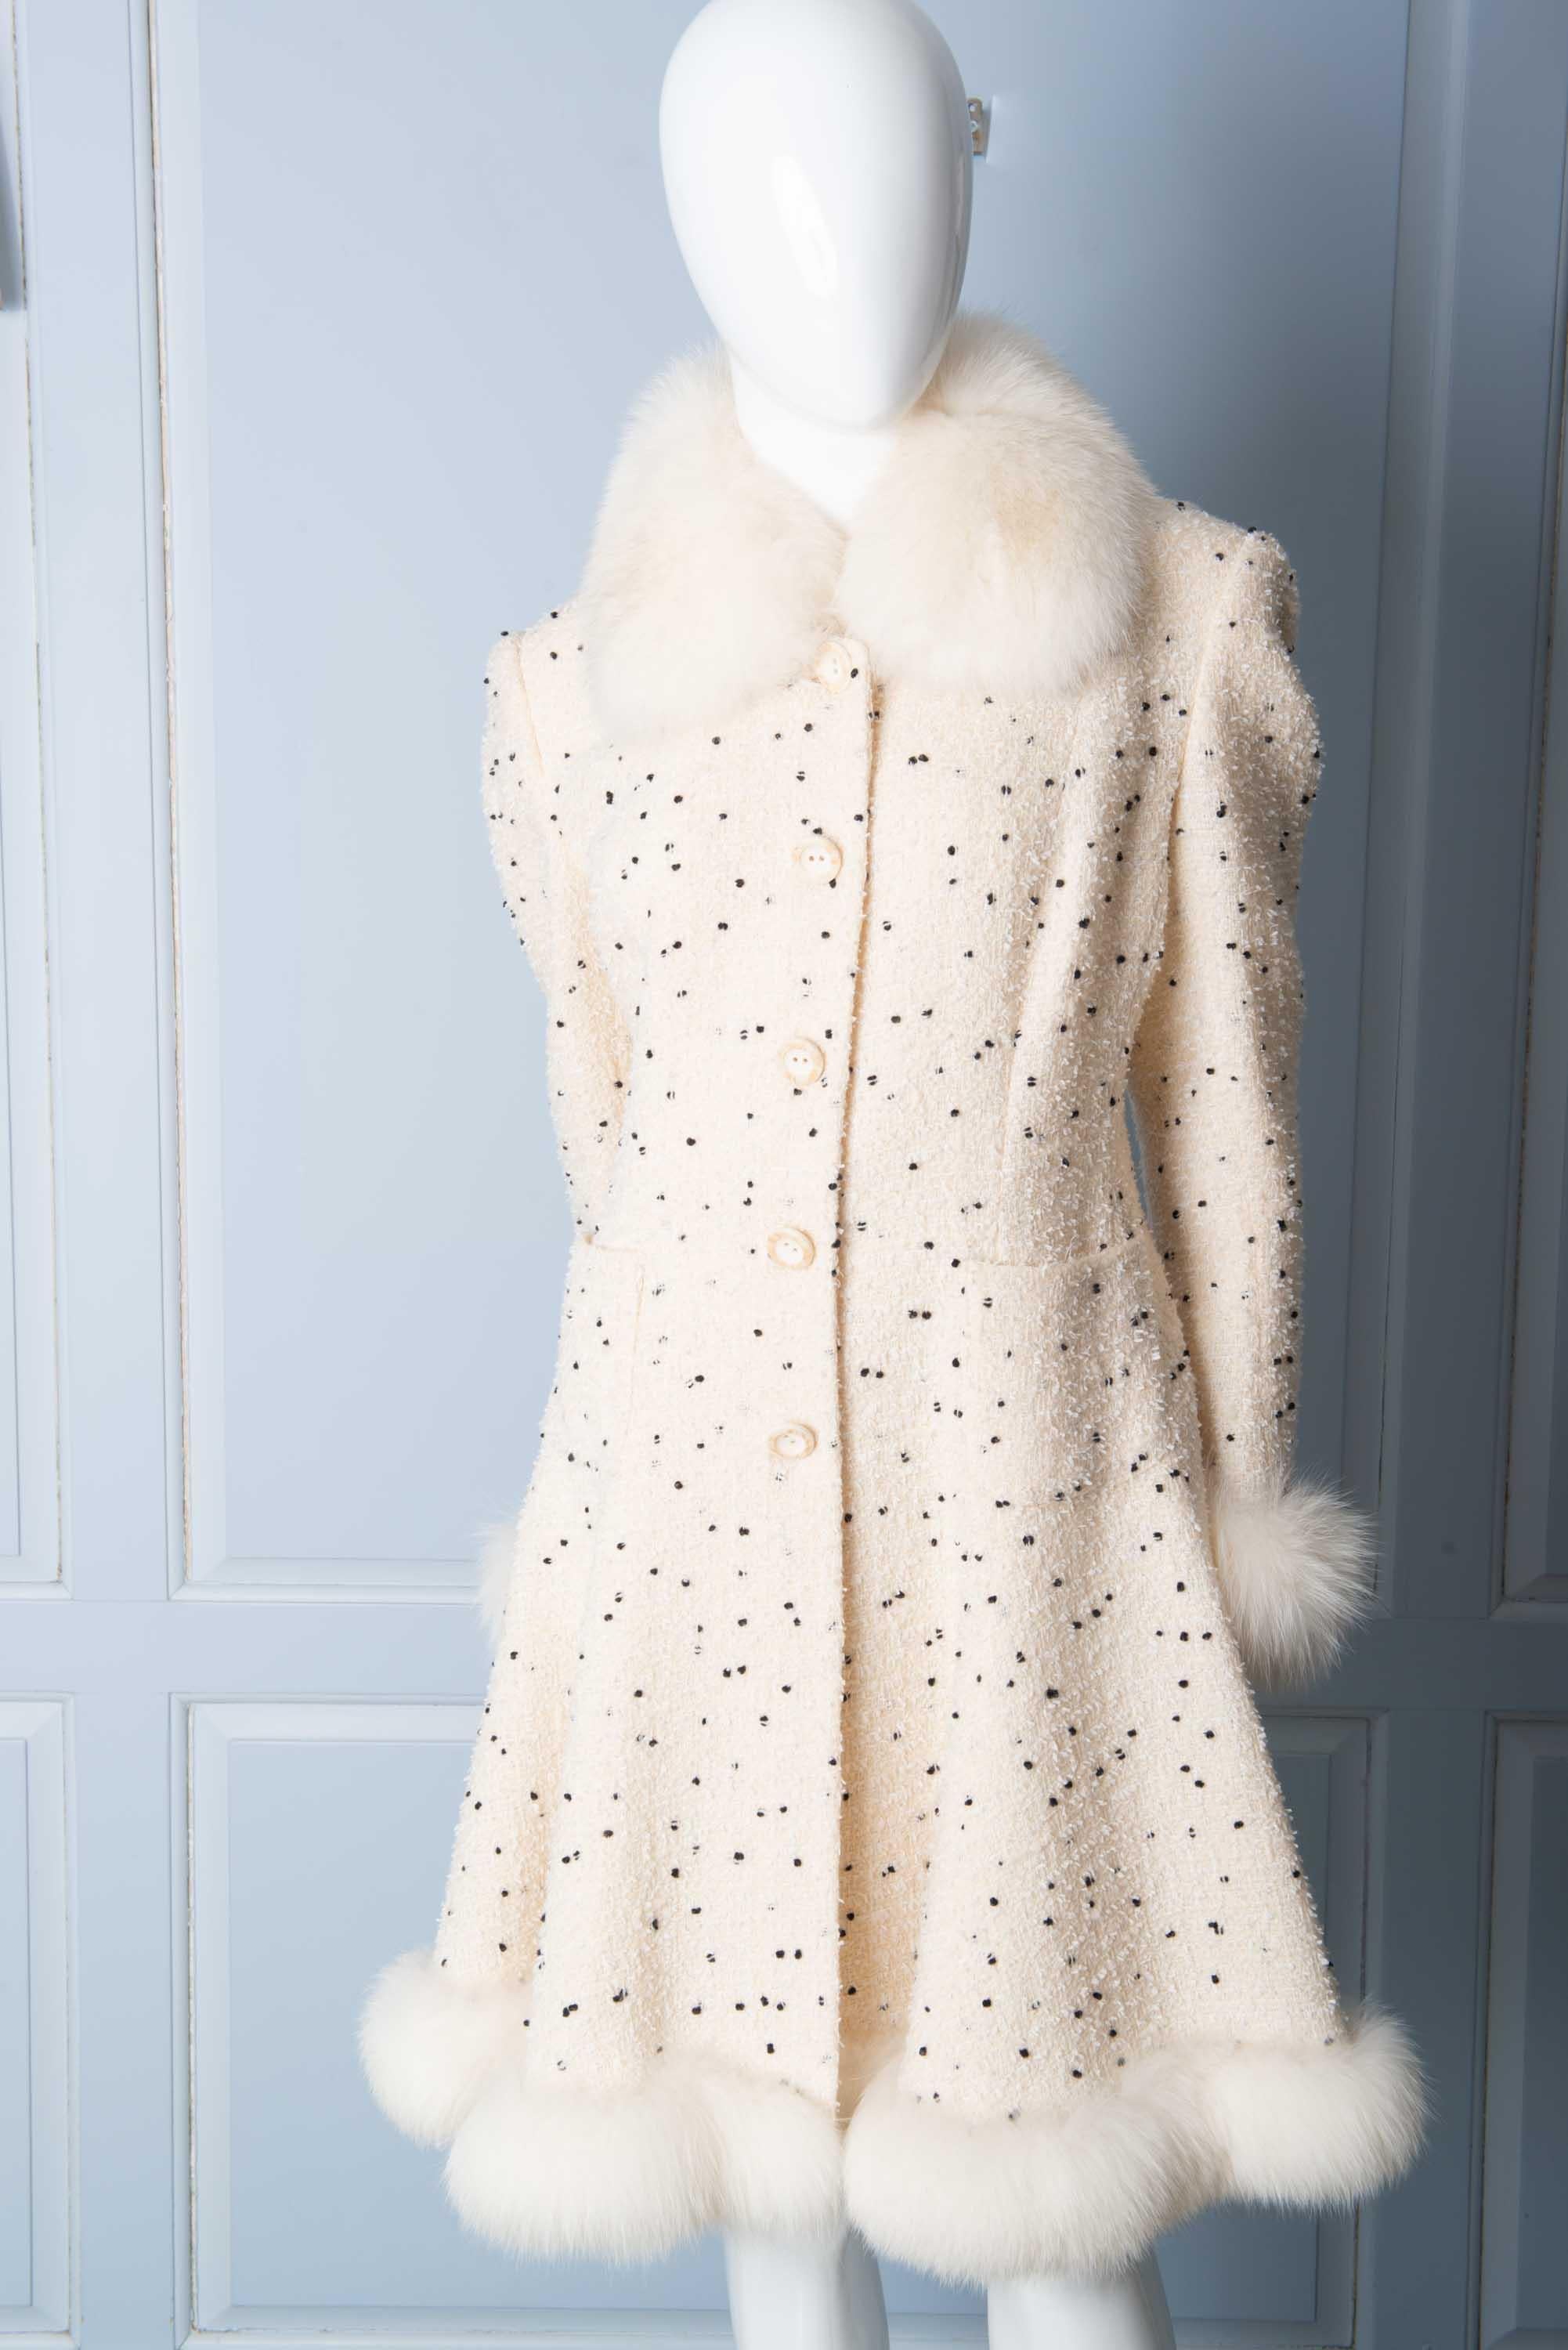 White boucle, black fleck Parisian coat with white fox fur collar, cuffs, and hem. Full lined. Fitted waist and full skirt. Annie Corvall, Rue St. Honore, Paris.